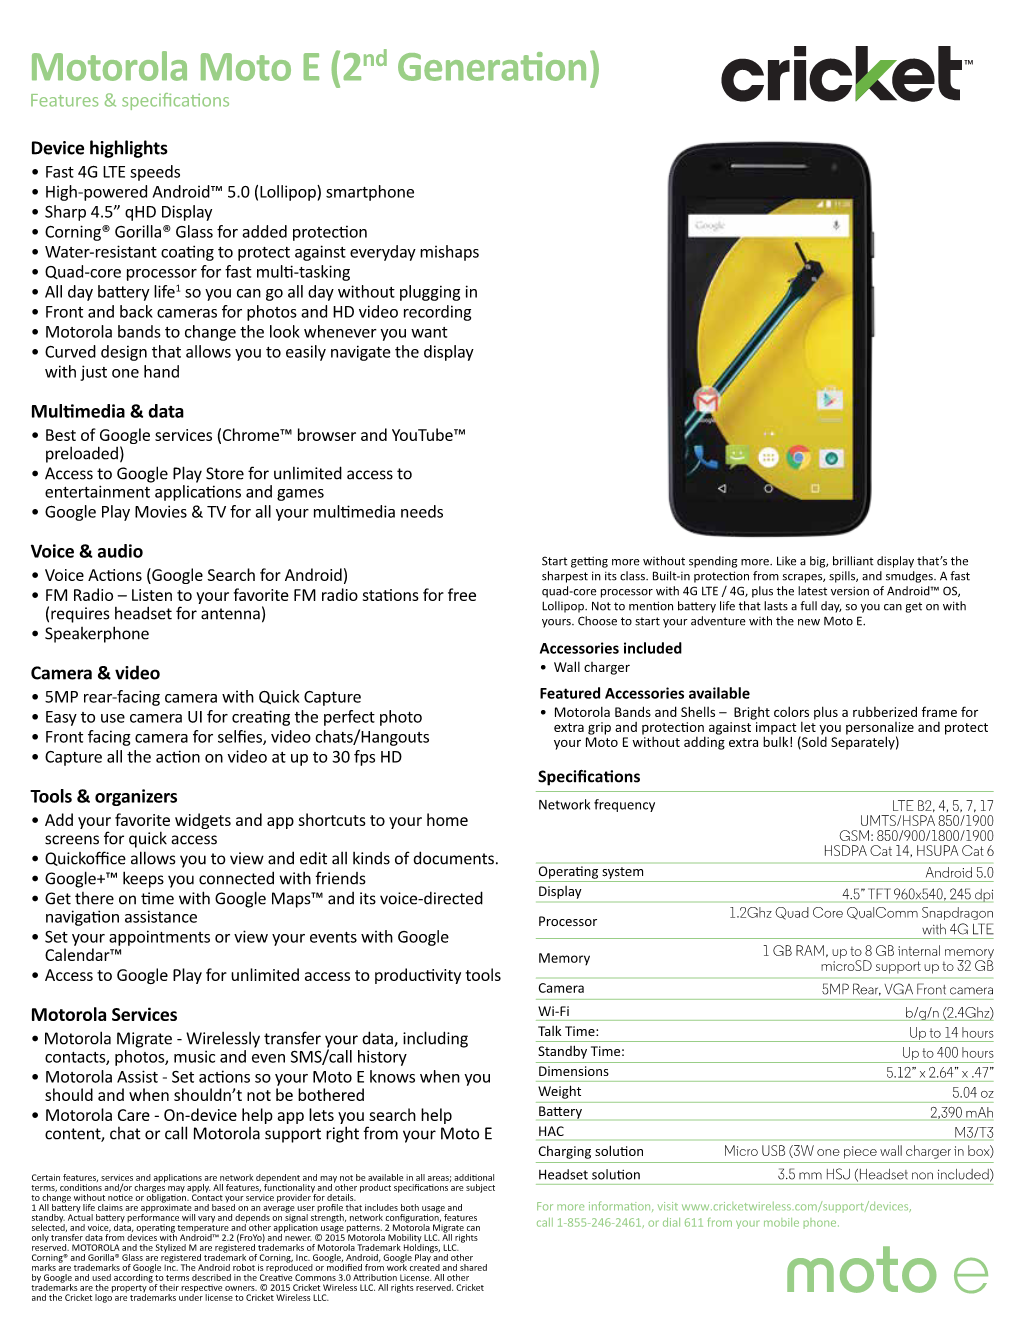 Motorola Moto E (2Nd Generation) Features & Speciﬁcations